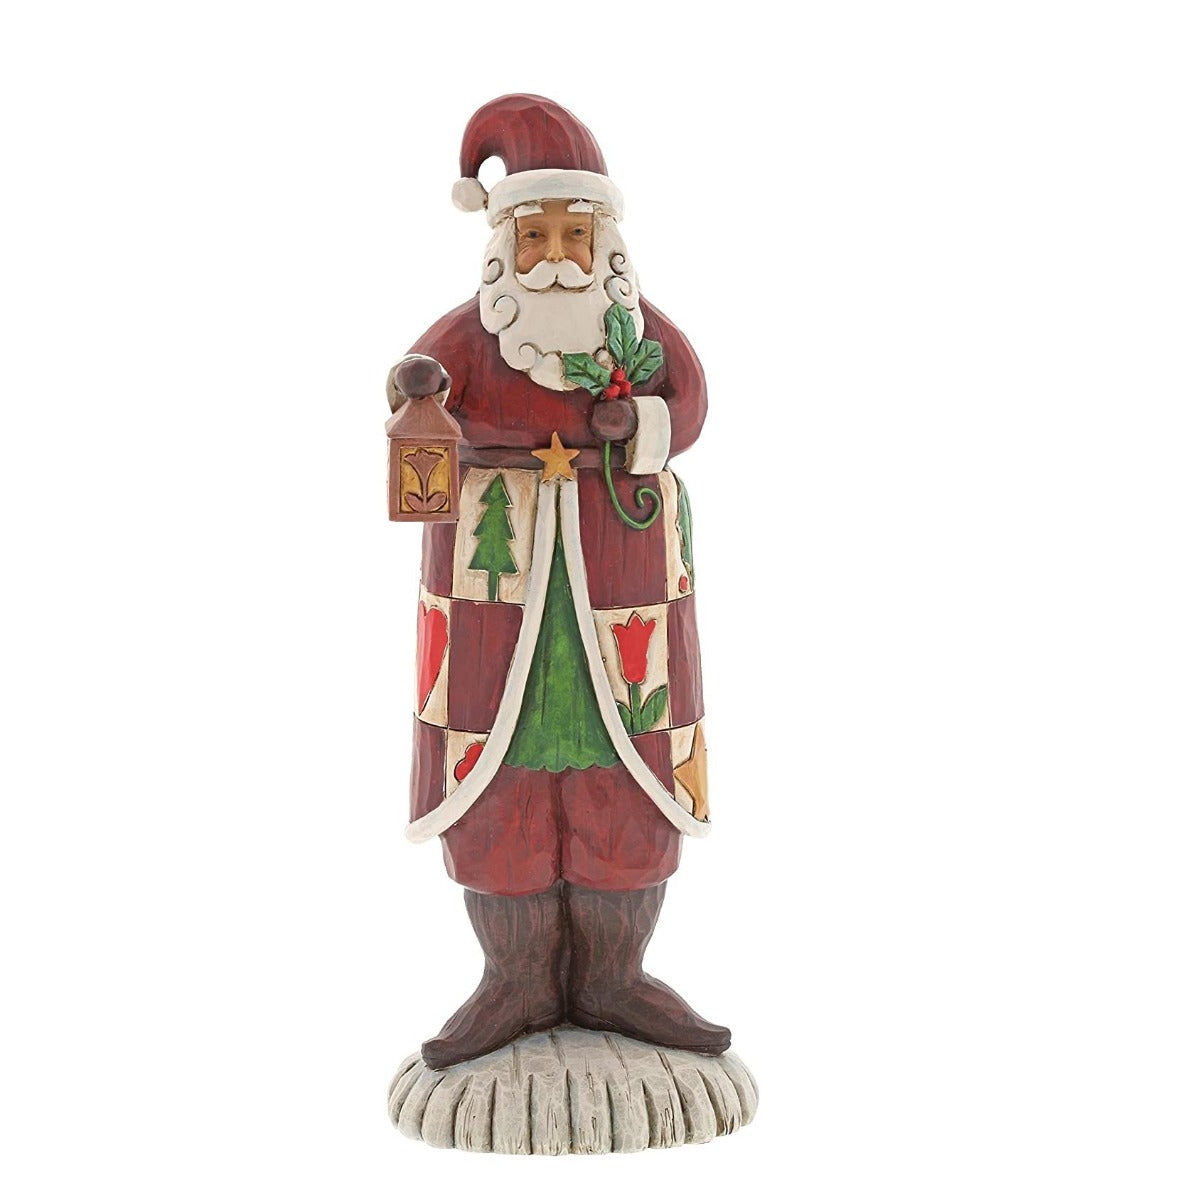 Jim Shore Heartwood Creek Folklore Santa With Lantern  The Folklore collection features Jim Shore's signature colour palette and heartfelt, rustic design. Cloaked in a charming patchwork of quaint holiday symbols, this handcrafted Santa holds a traditional lantern and cheery sprig of holly.